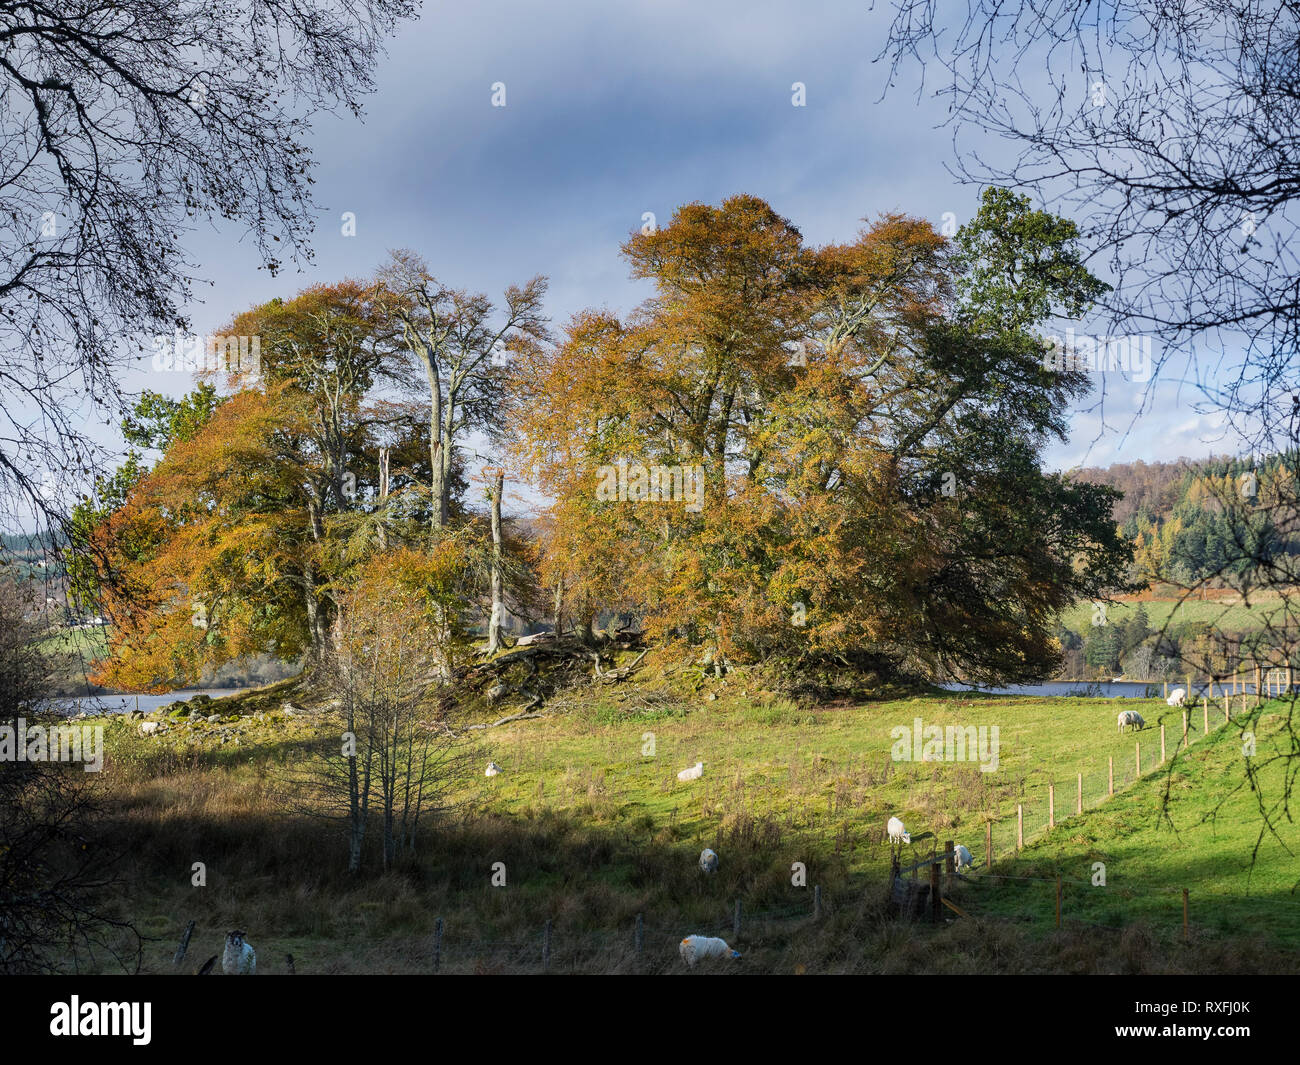 Sheep by a group of trees in Autumn. Glen Urquhart, Highland Region, Scotland Stock Photo